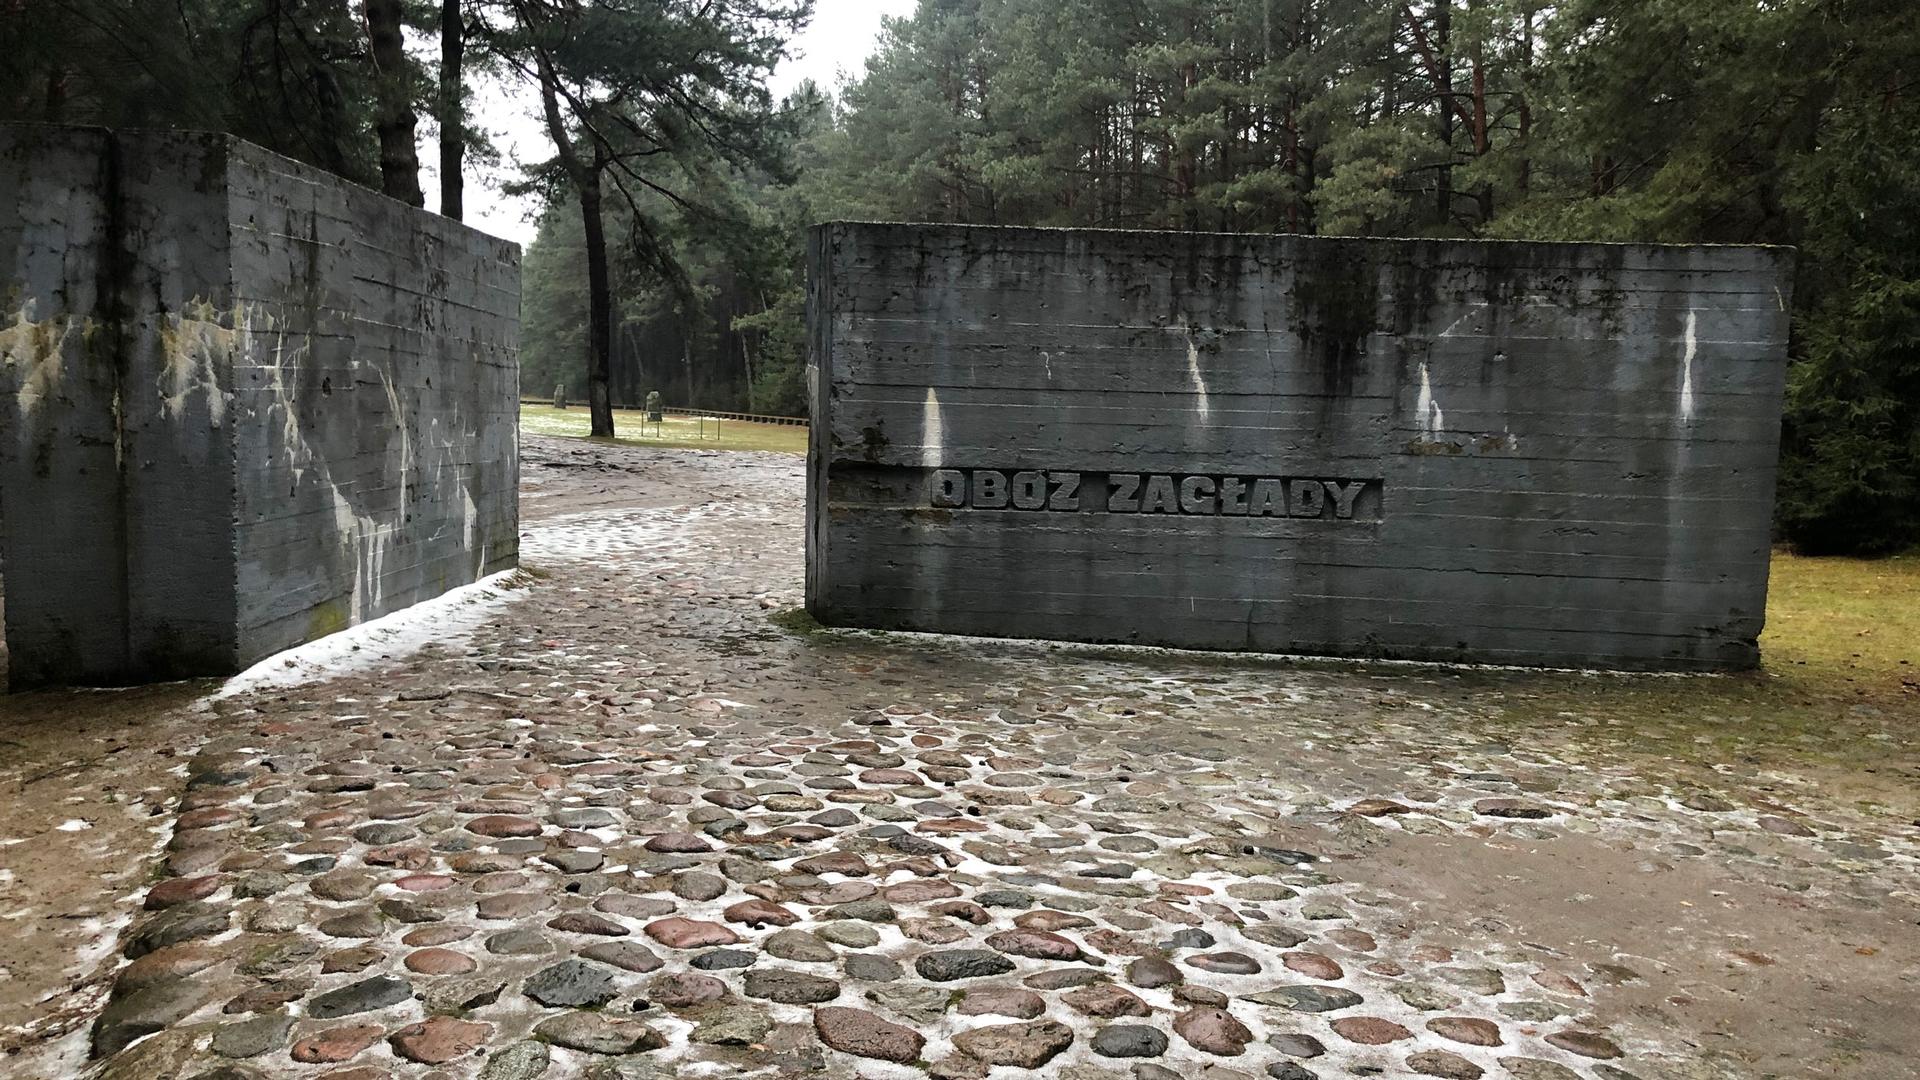 The entrance to Treblinka, one of Europe’s largest World War II-era extermination camps. 